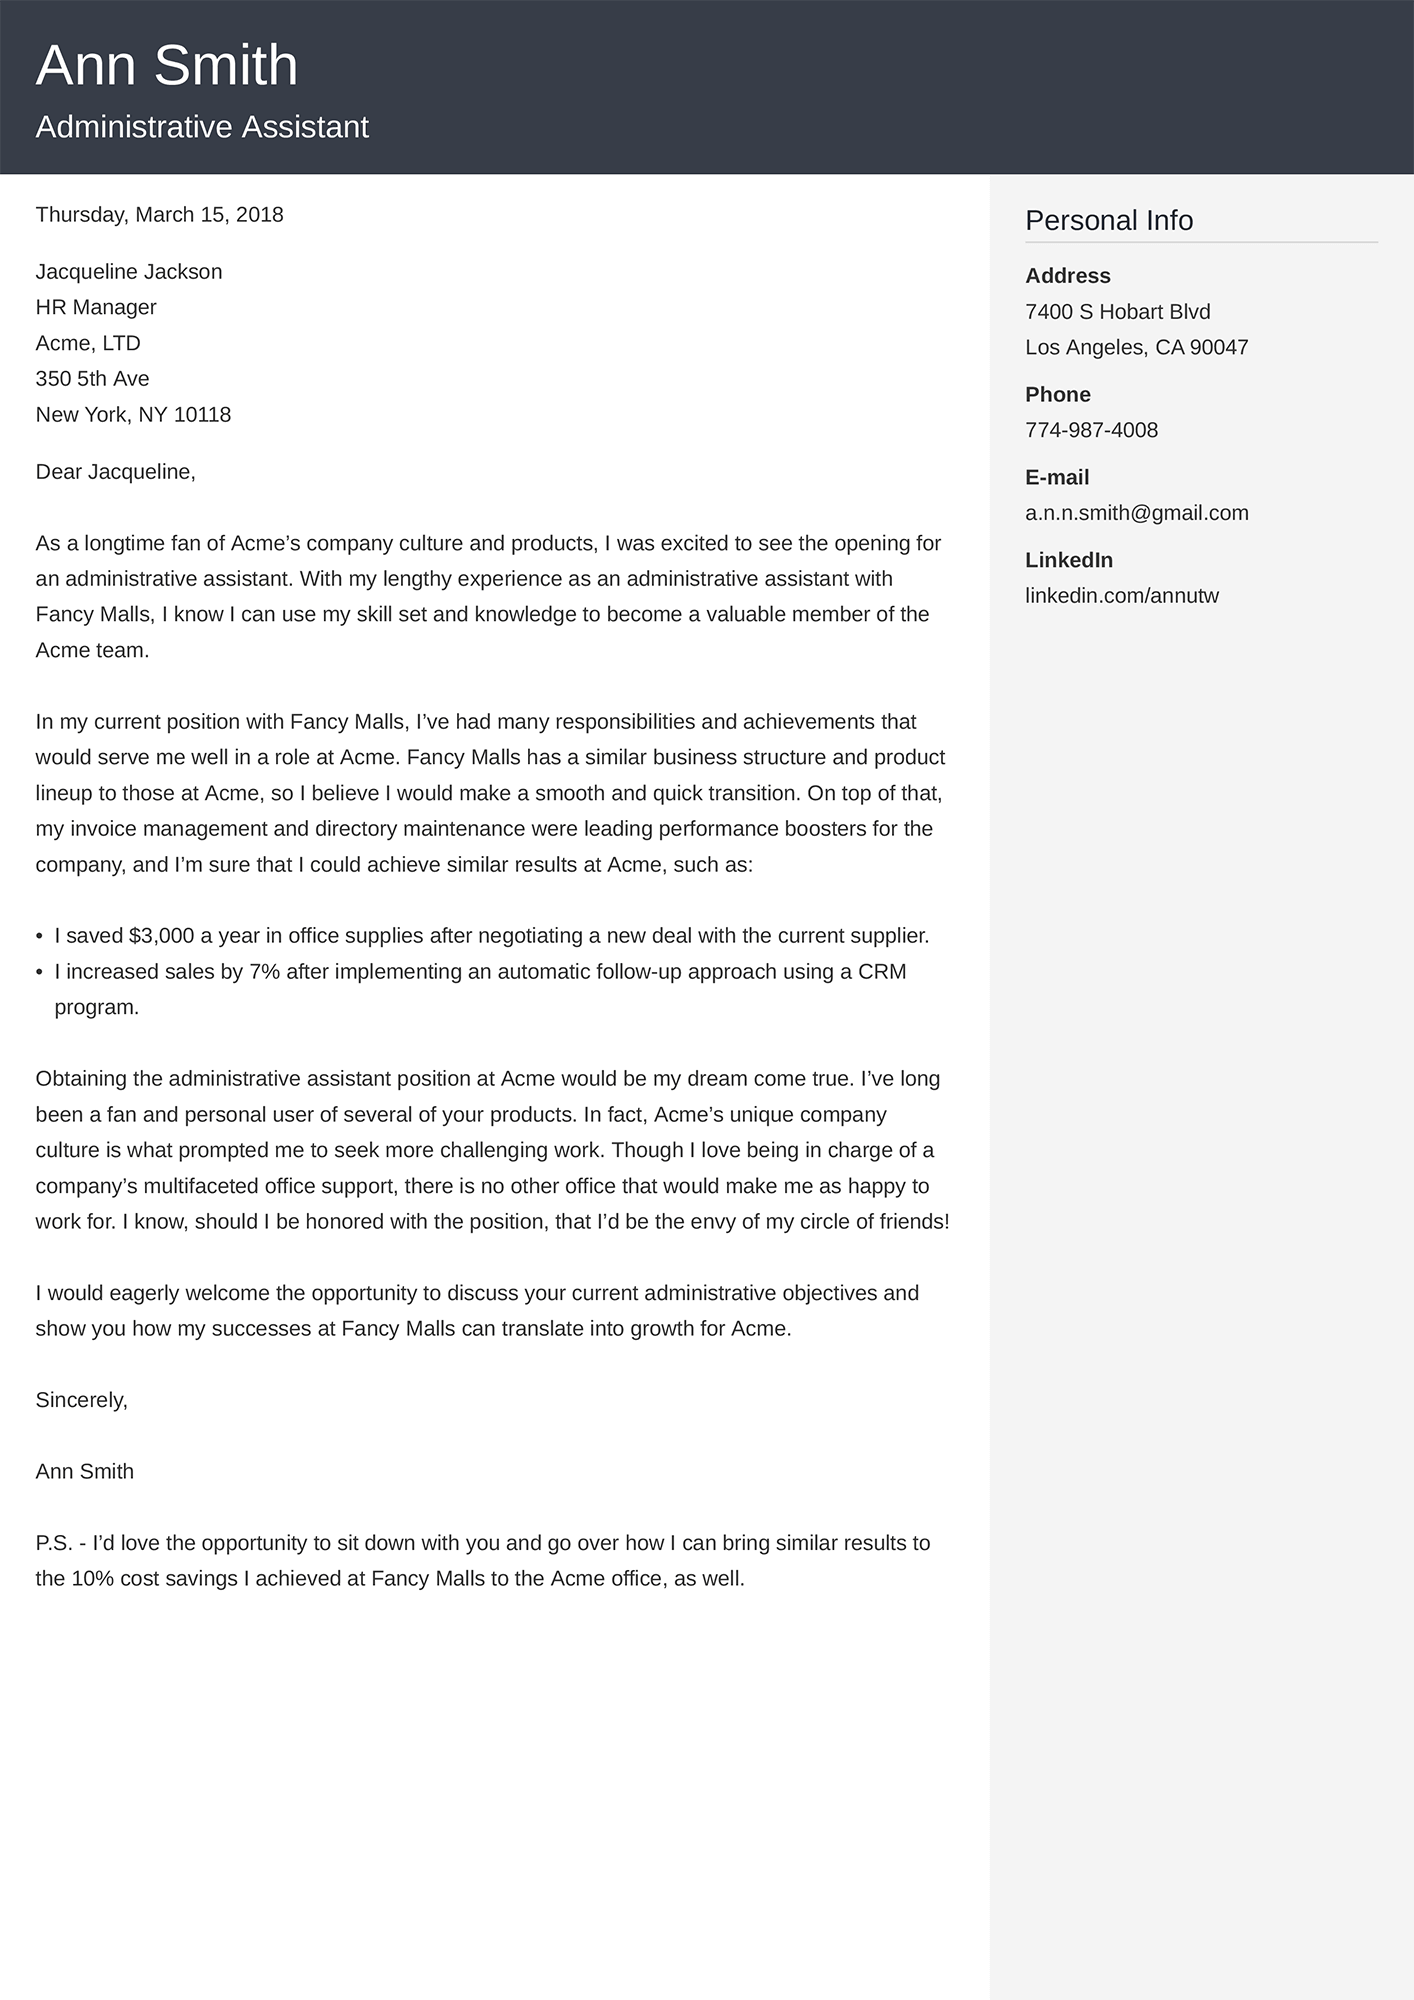 Cover Letter/Other Professional Details from cdn-images.zety.com